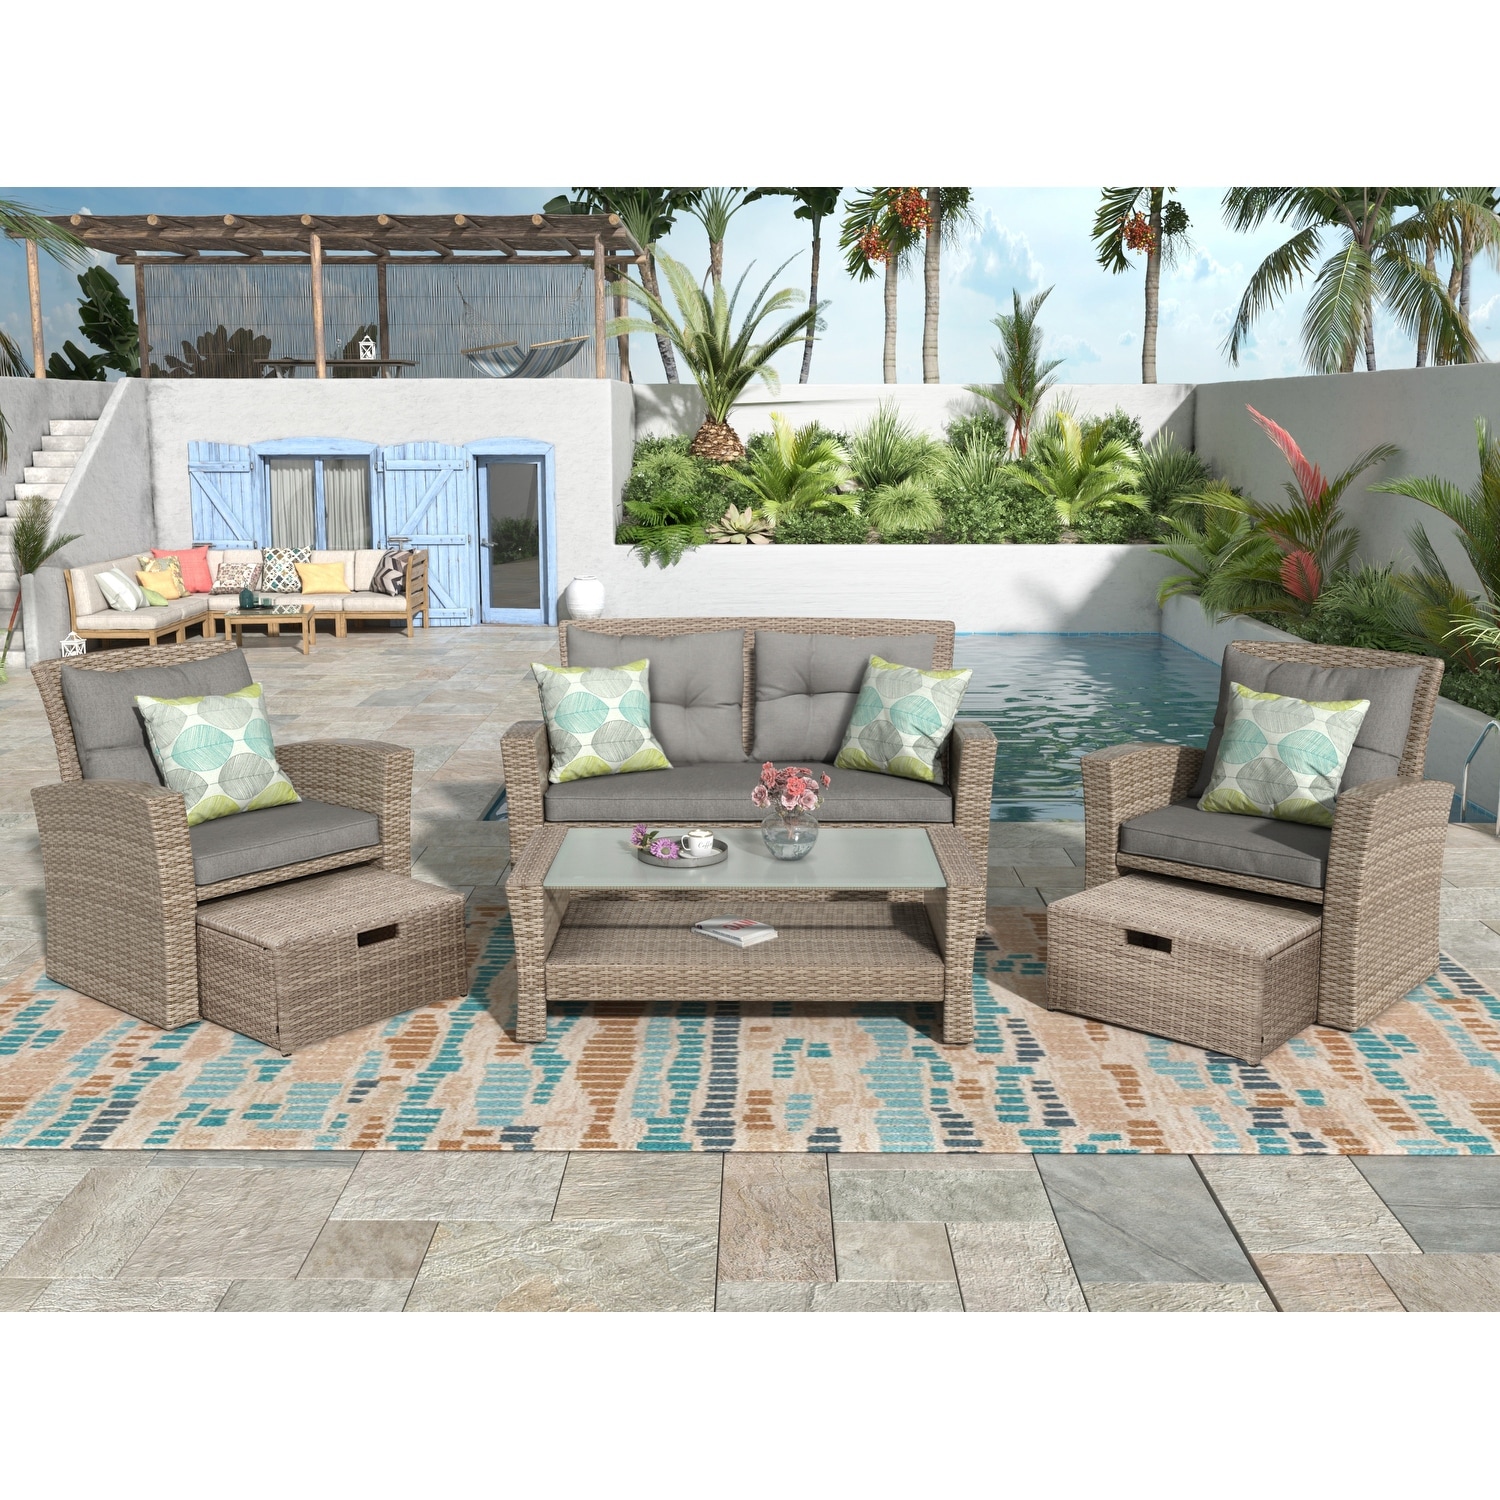 Ottoman-inclusive 4-piece Rattan Sectional Sofa Set For 4-6  Outdoor Garden Sectional Furniture With Tempered Glass Table